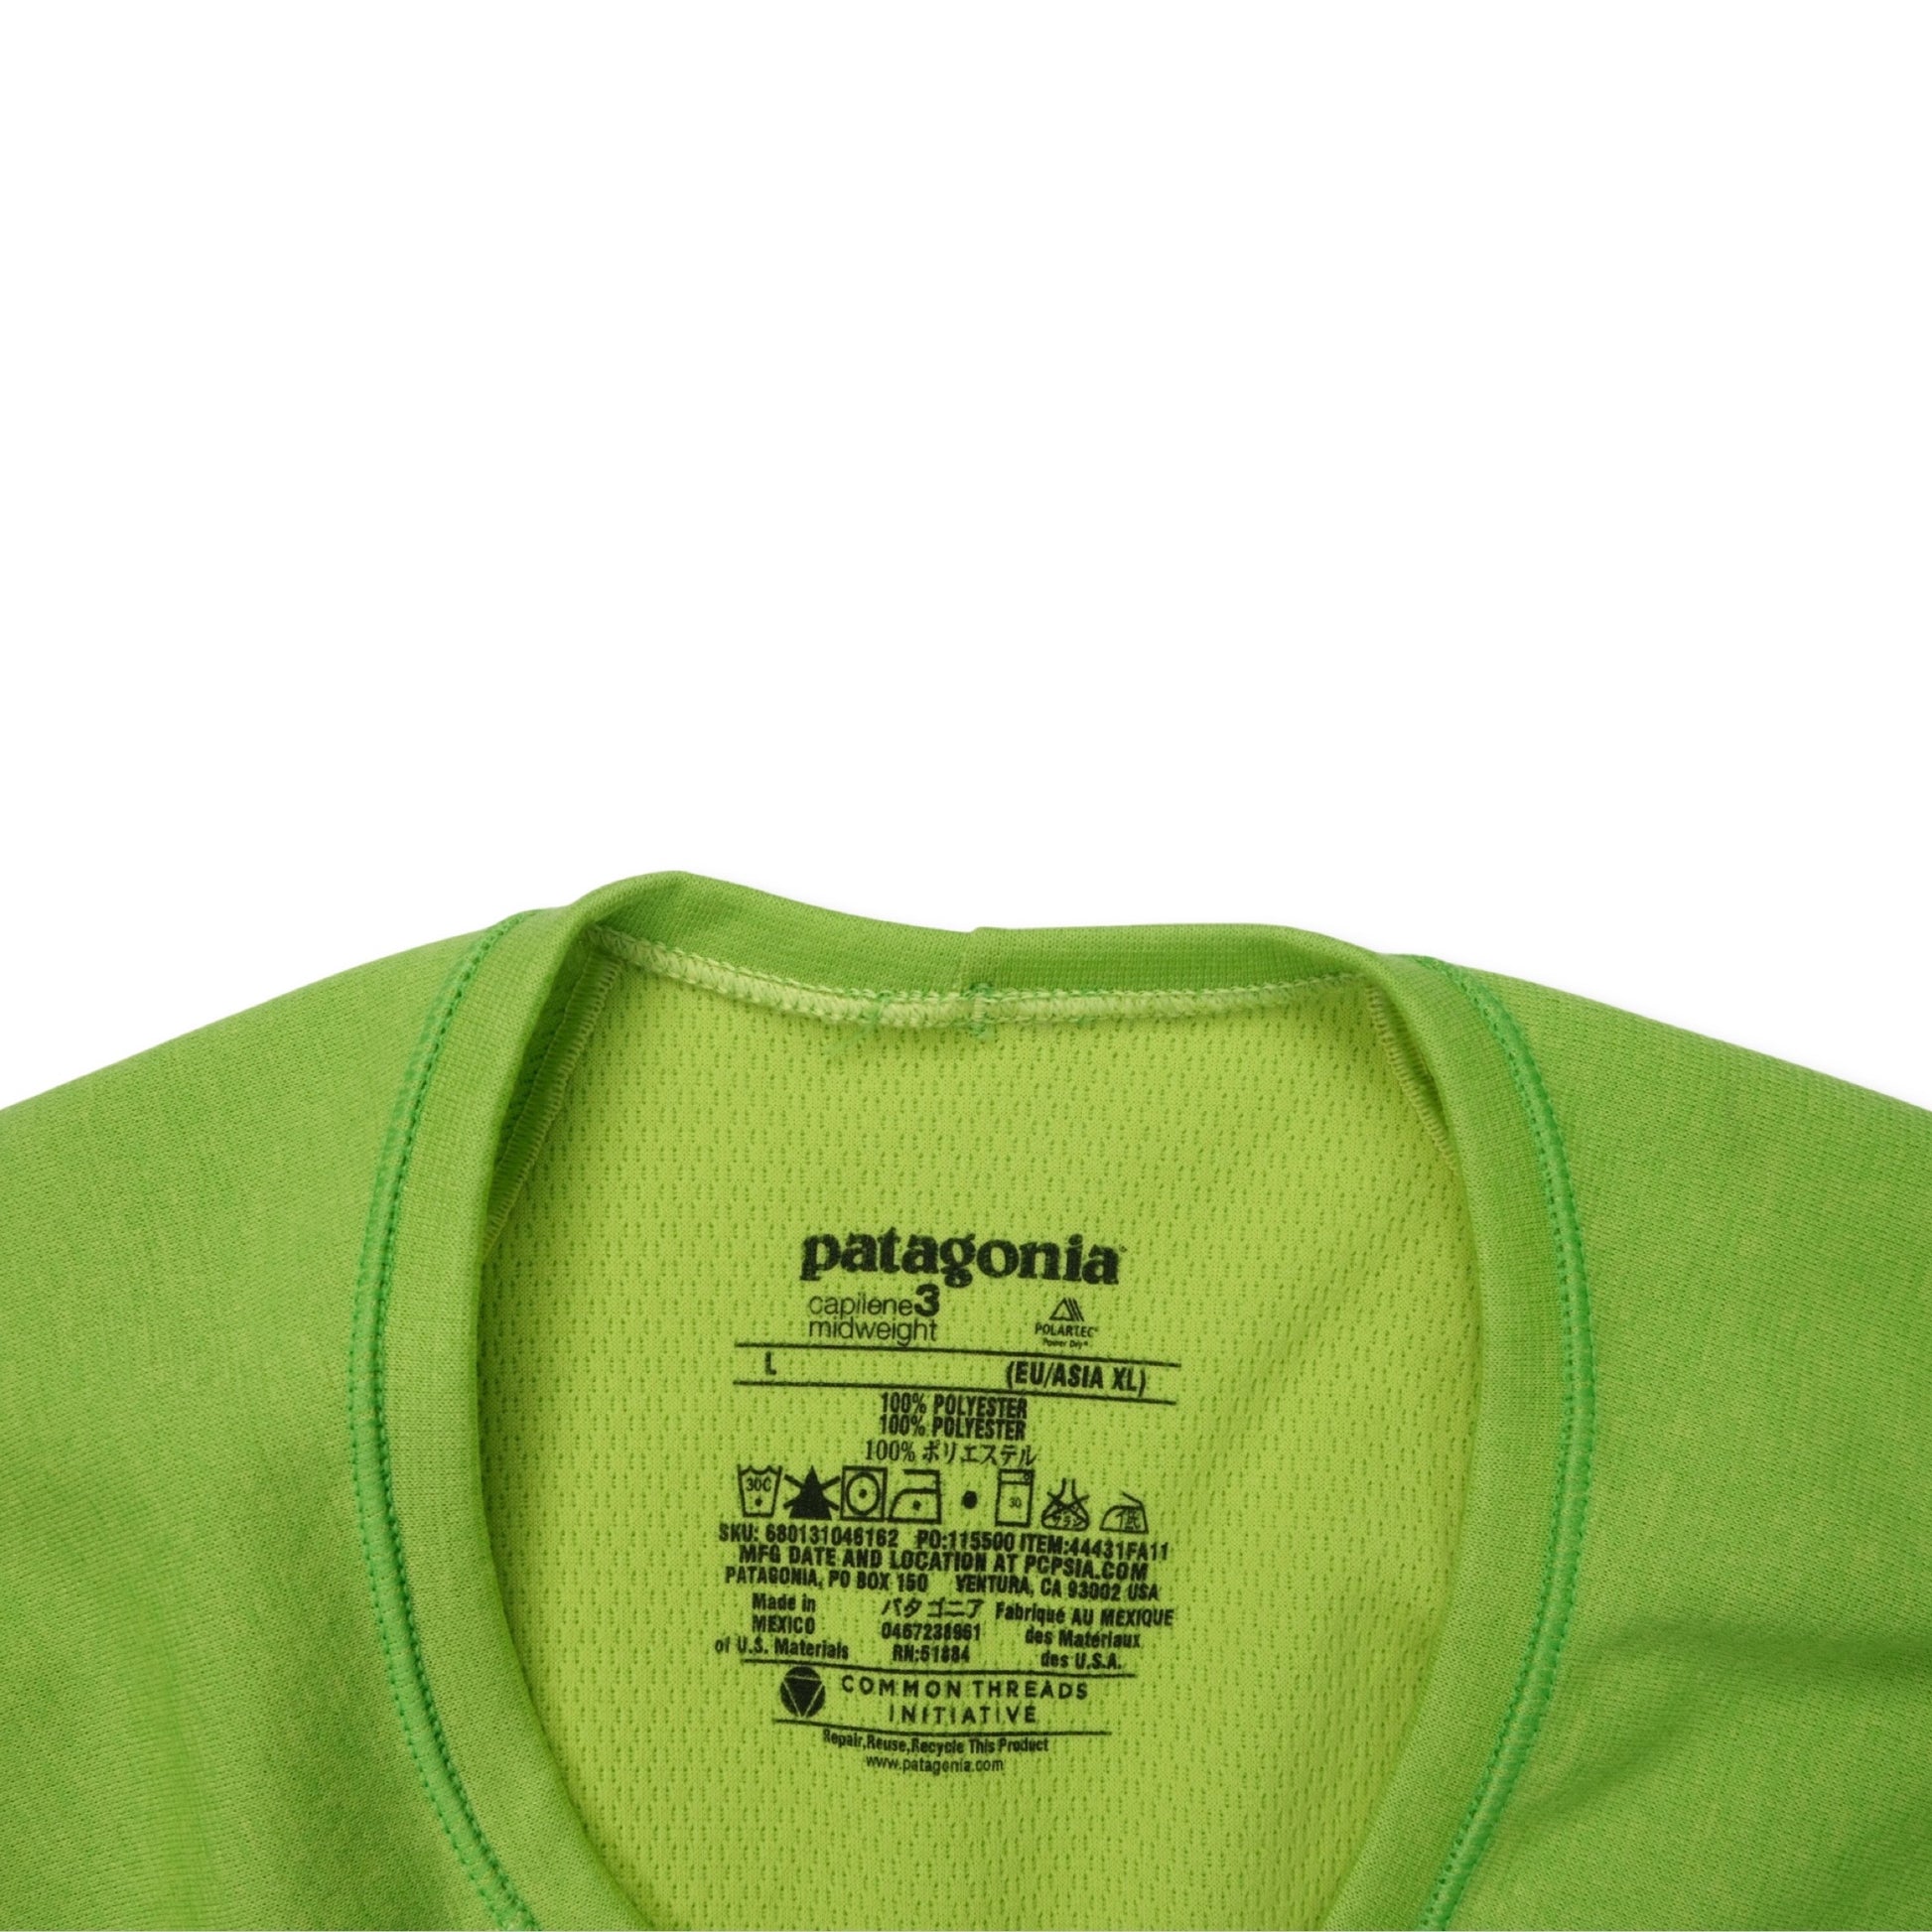 Patagonia Capilene Midweight 3 Base Layer Top – Pando Refitters